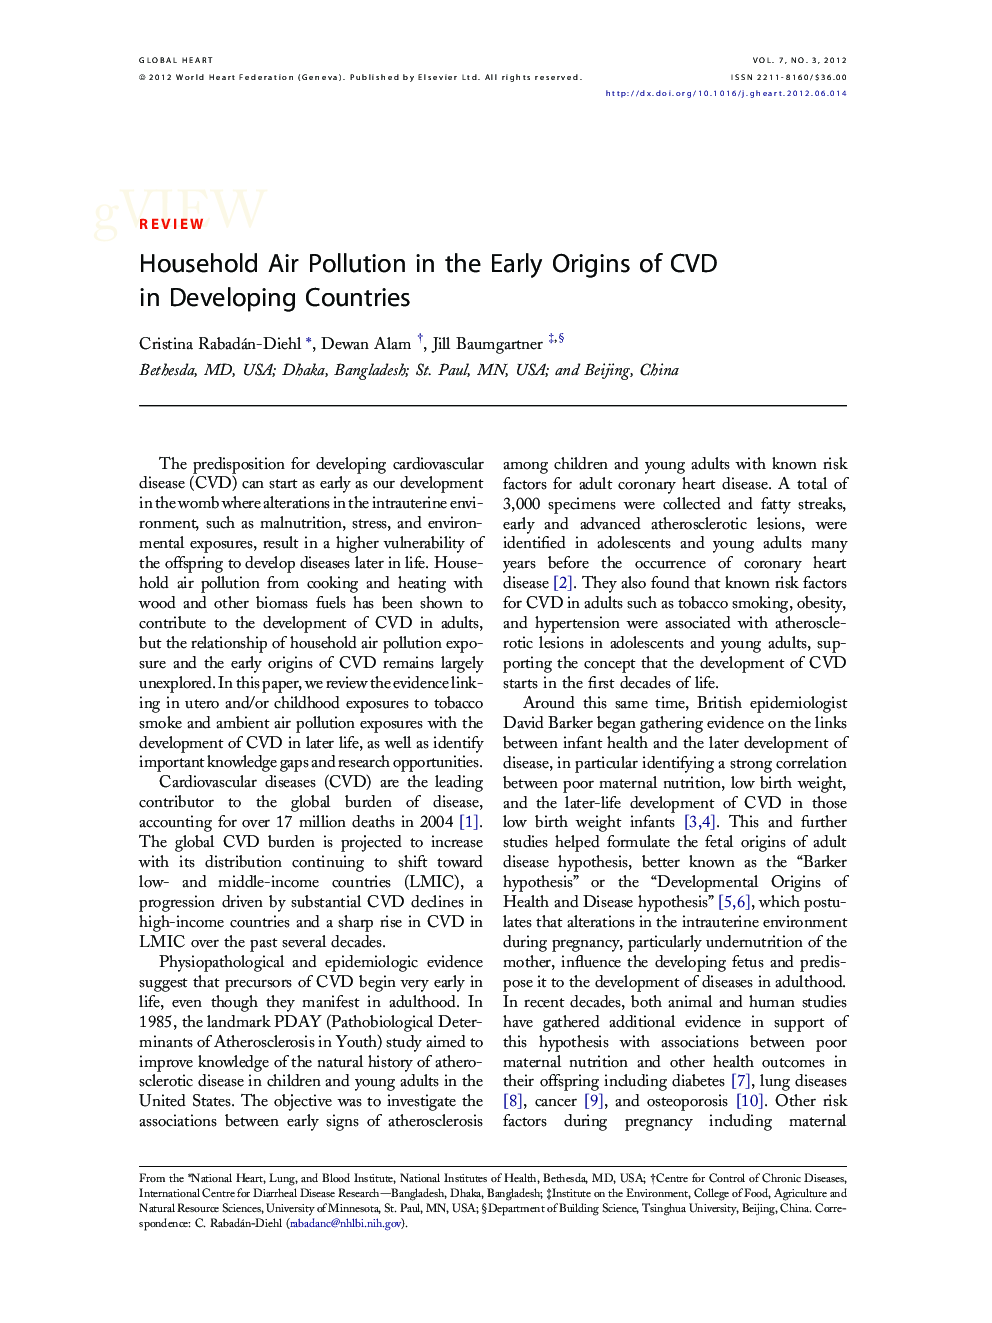 Household Air Pollution in the Early Origins of CVD in Developing Countries